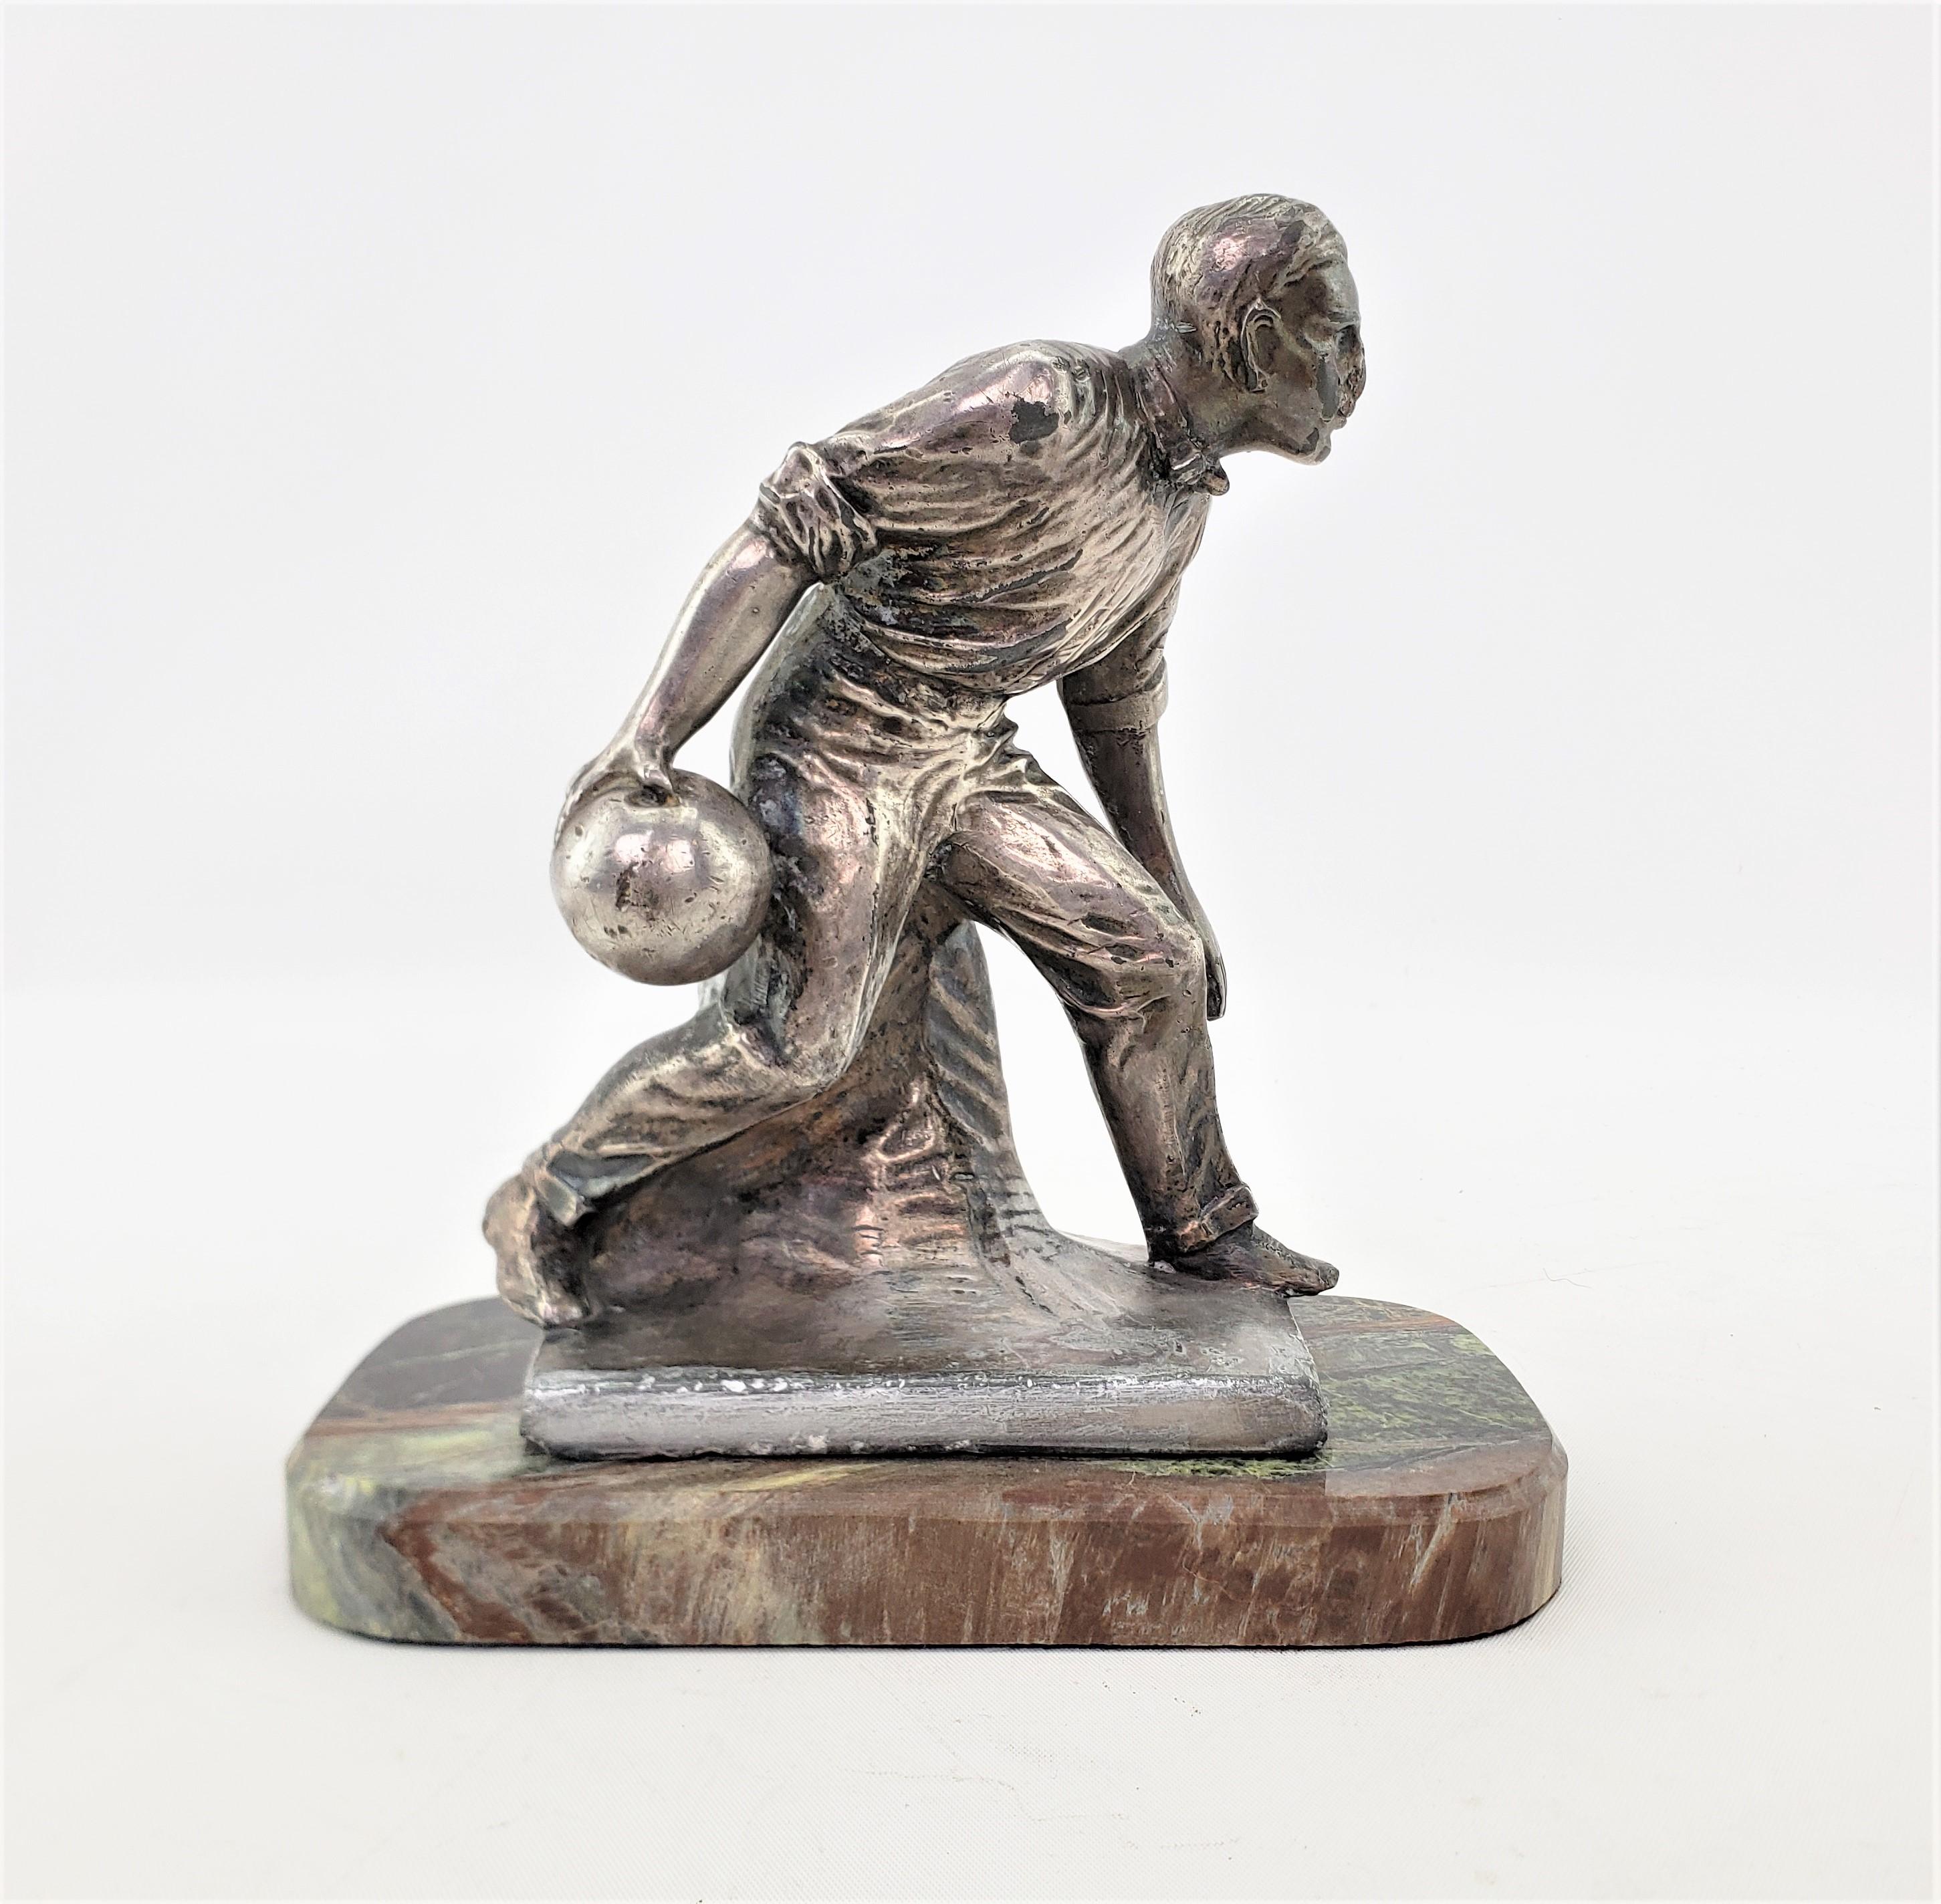 This sculpture was made by the Weidlich Brothers Manufacturing Company of the United States in approximately 1920 in the period Art Deco style. The sculpture is composed of silver plate over cast metal and depicts a man bowling in period attire. The